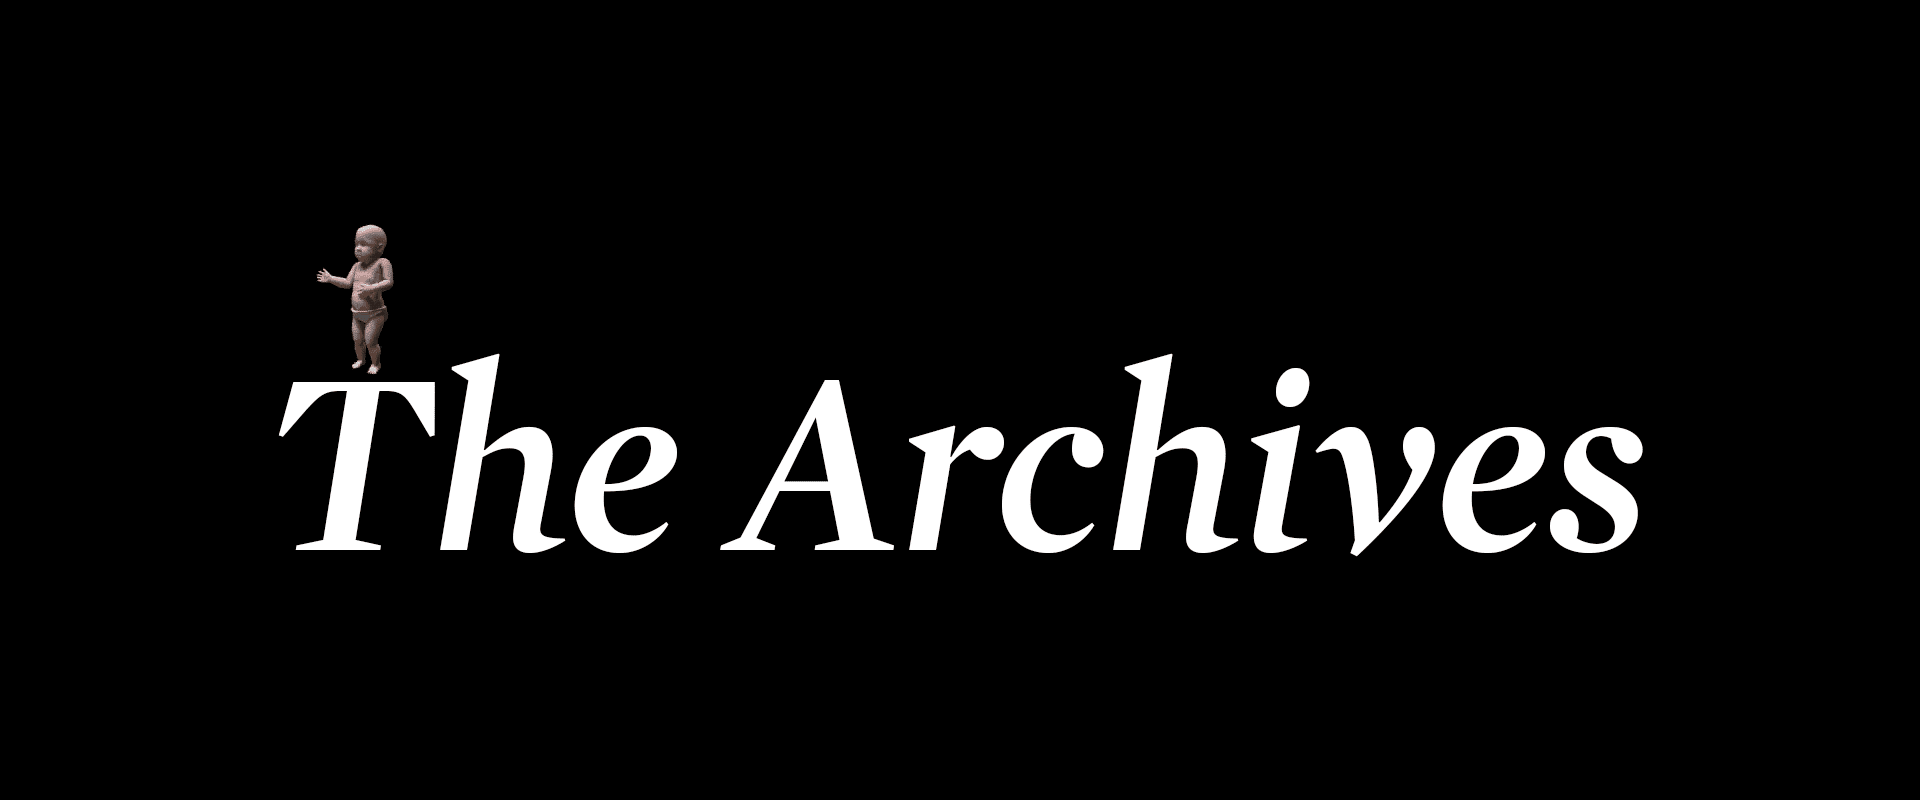 TheArchive